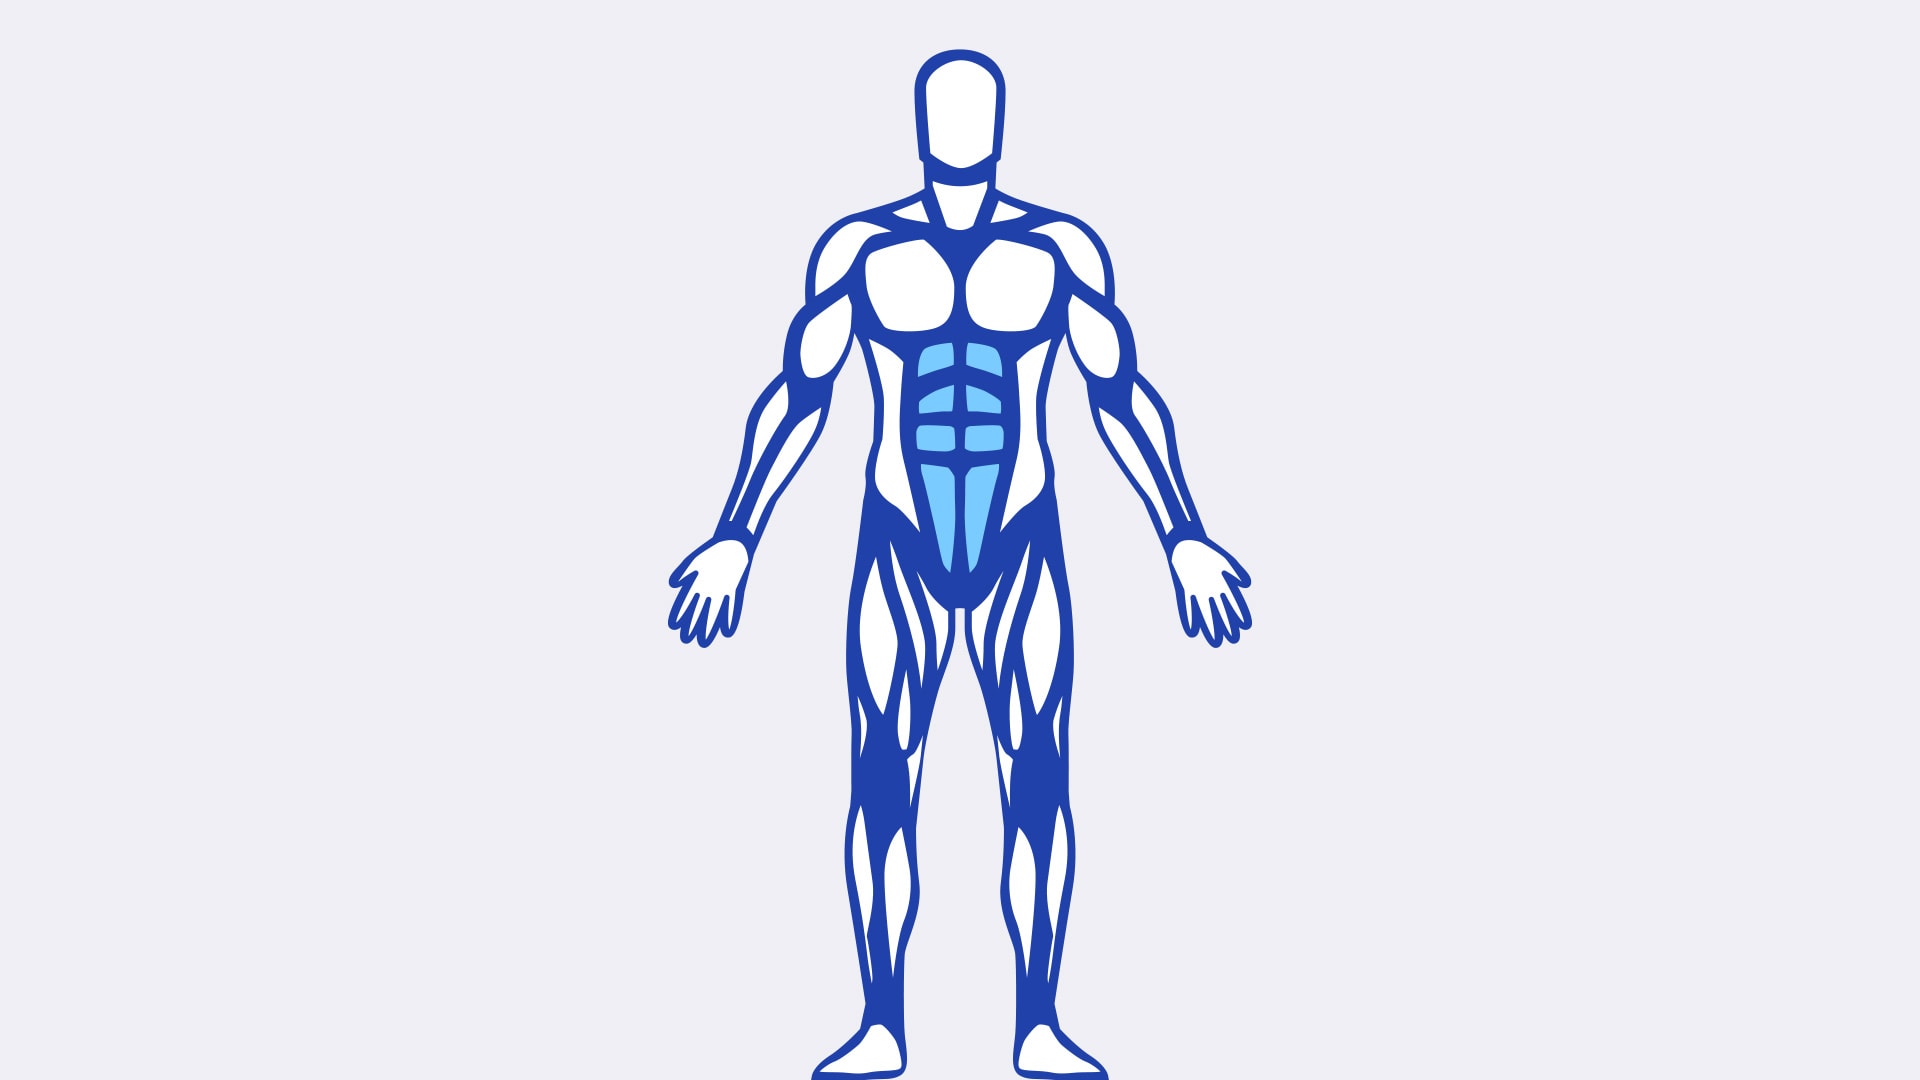 The six-pack is technically known as the rectus abdominis